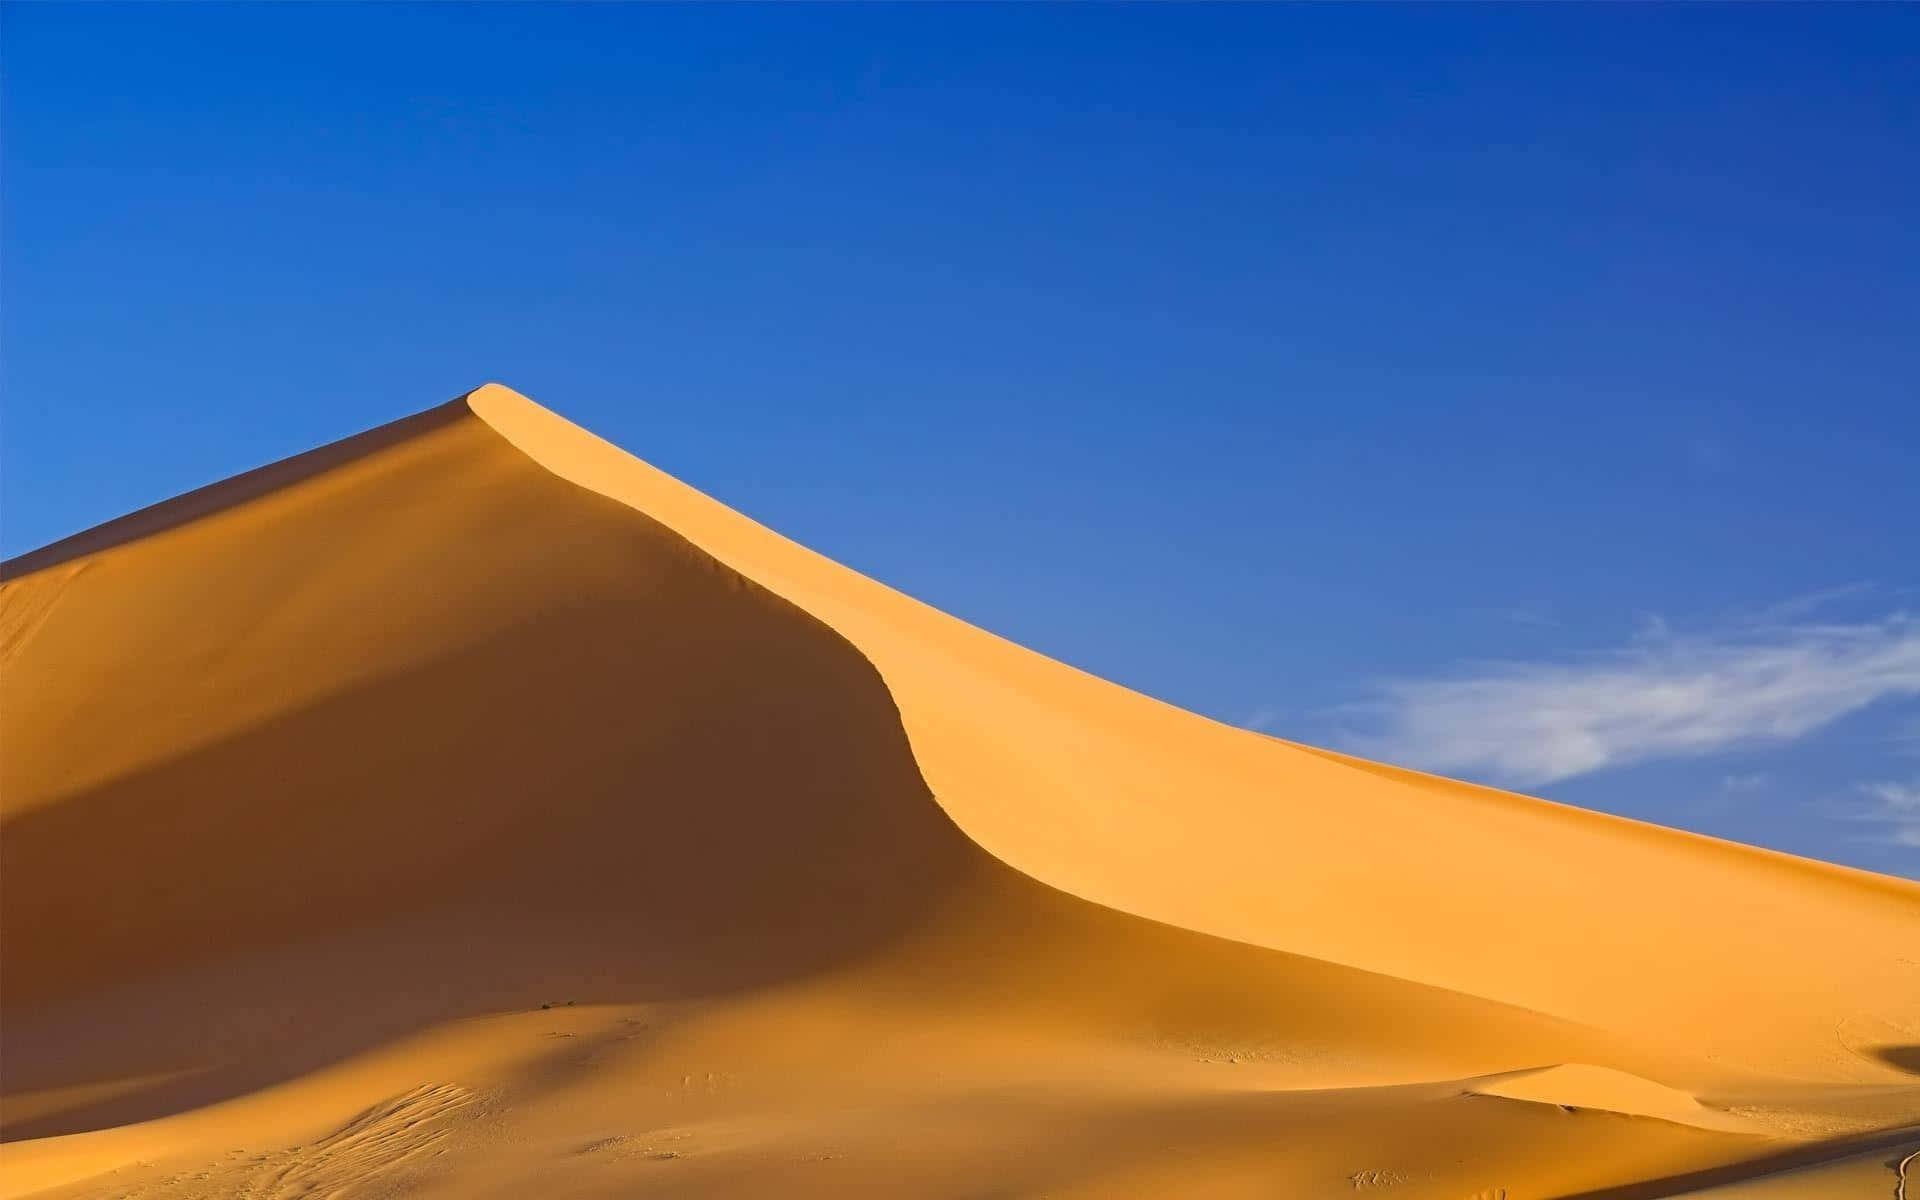 Arrakis is known for its beautiful desert dunes.